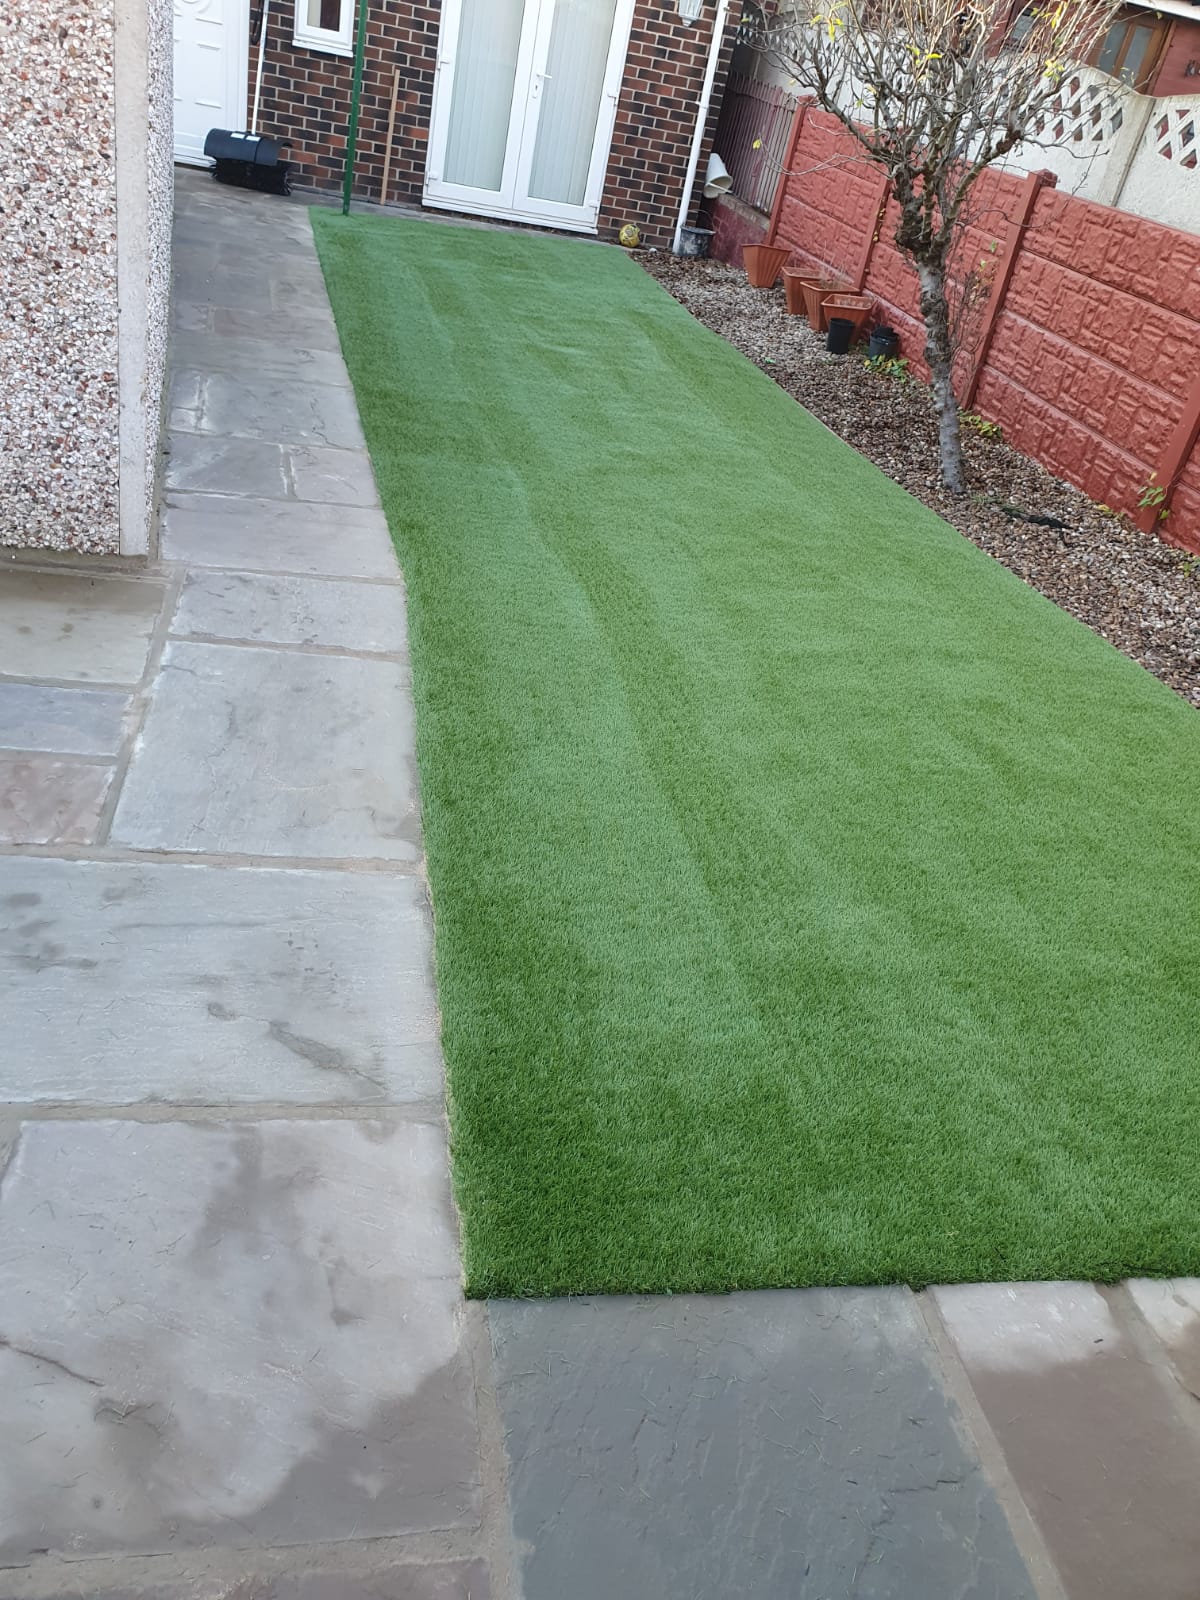 30m2 artificial grass lawn installed in Eastwood Rotherham